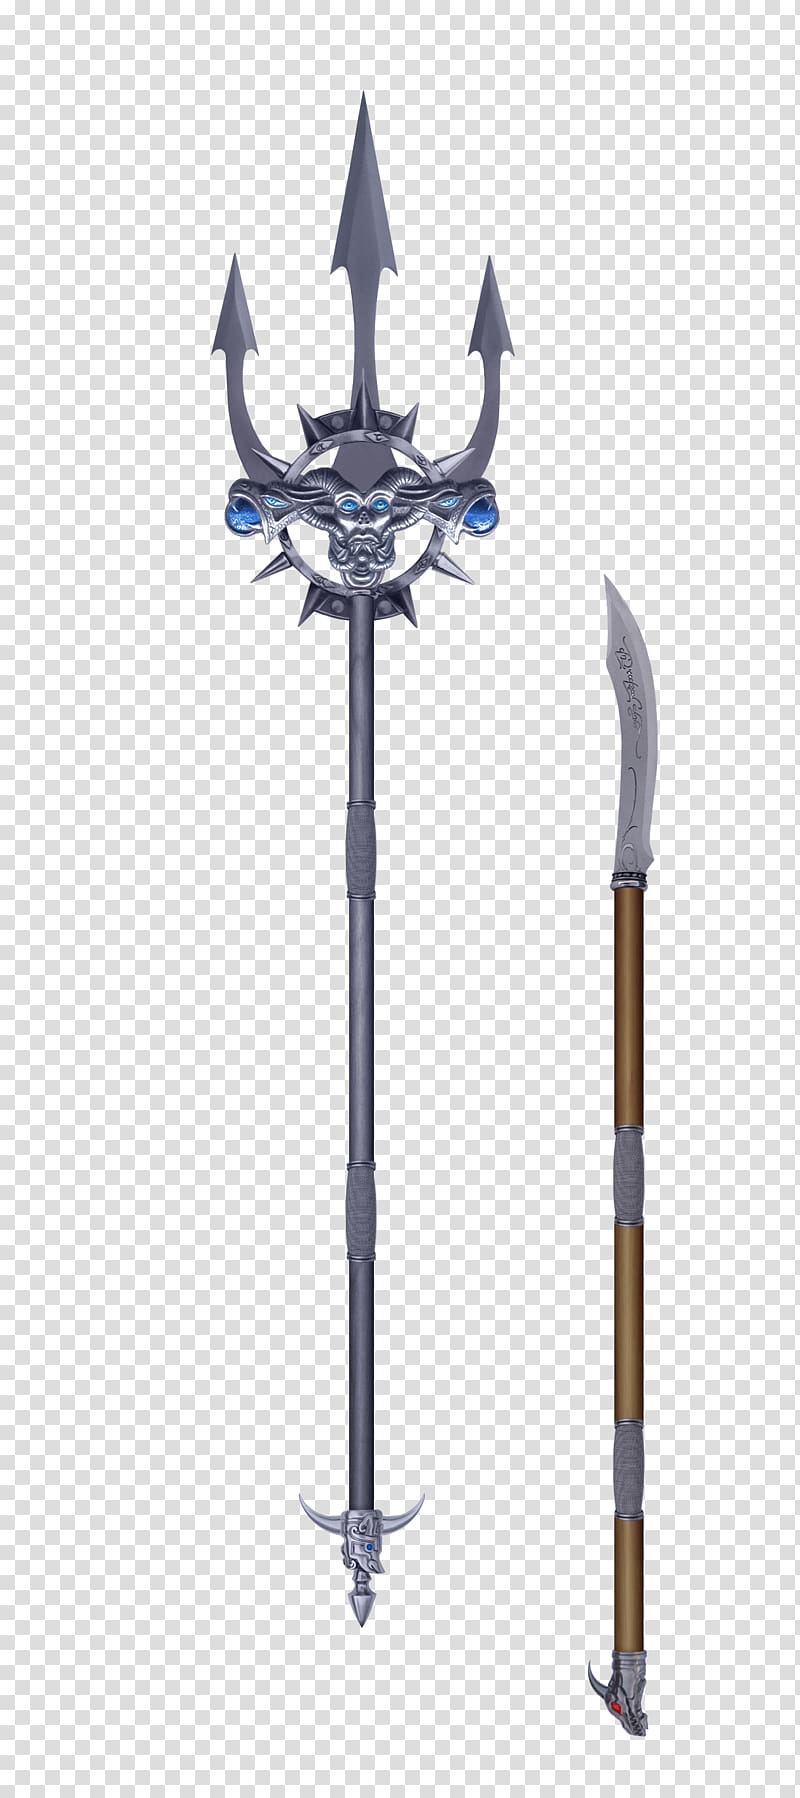 Sword Knife Weapon Trident, Silver weapons transparent background PNG clipart